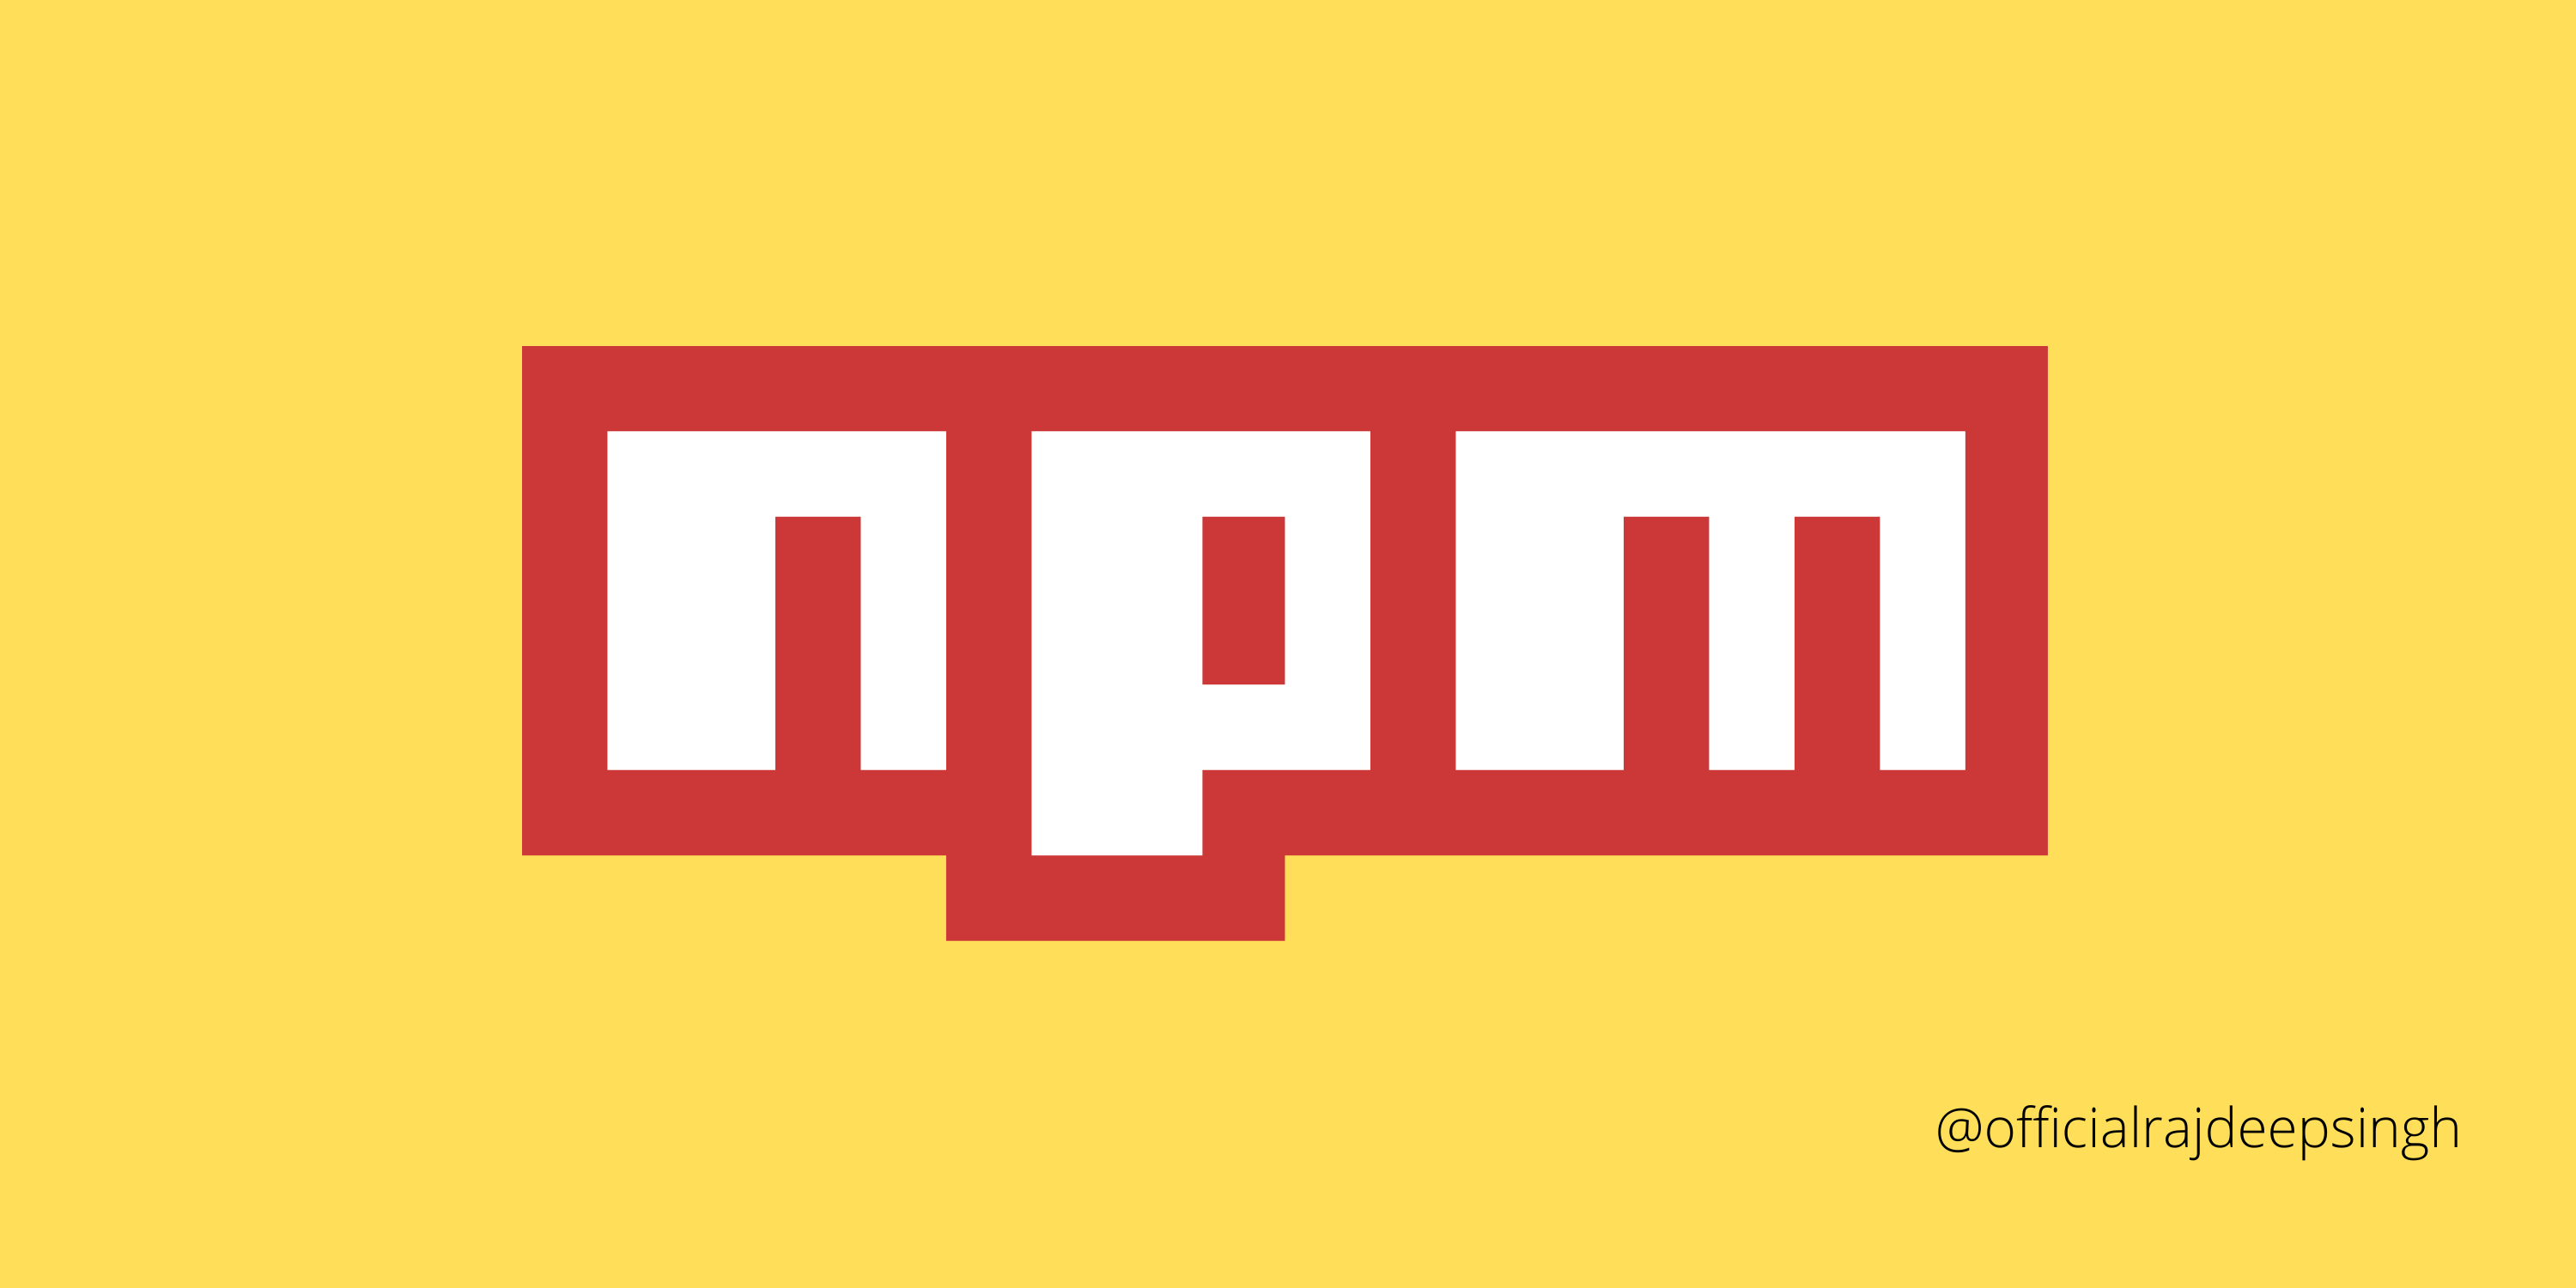 Learn the NPM outdated package command?